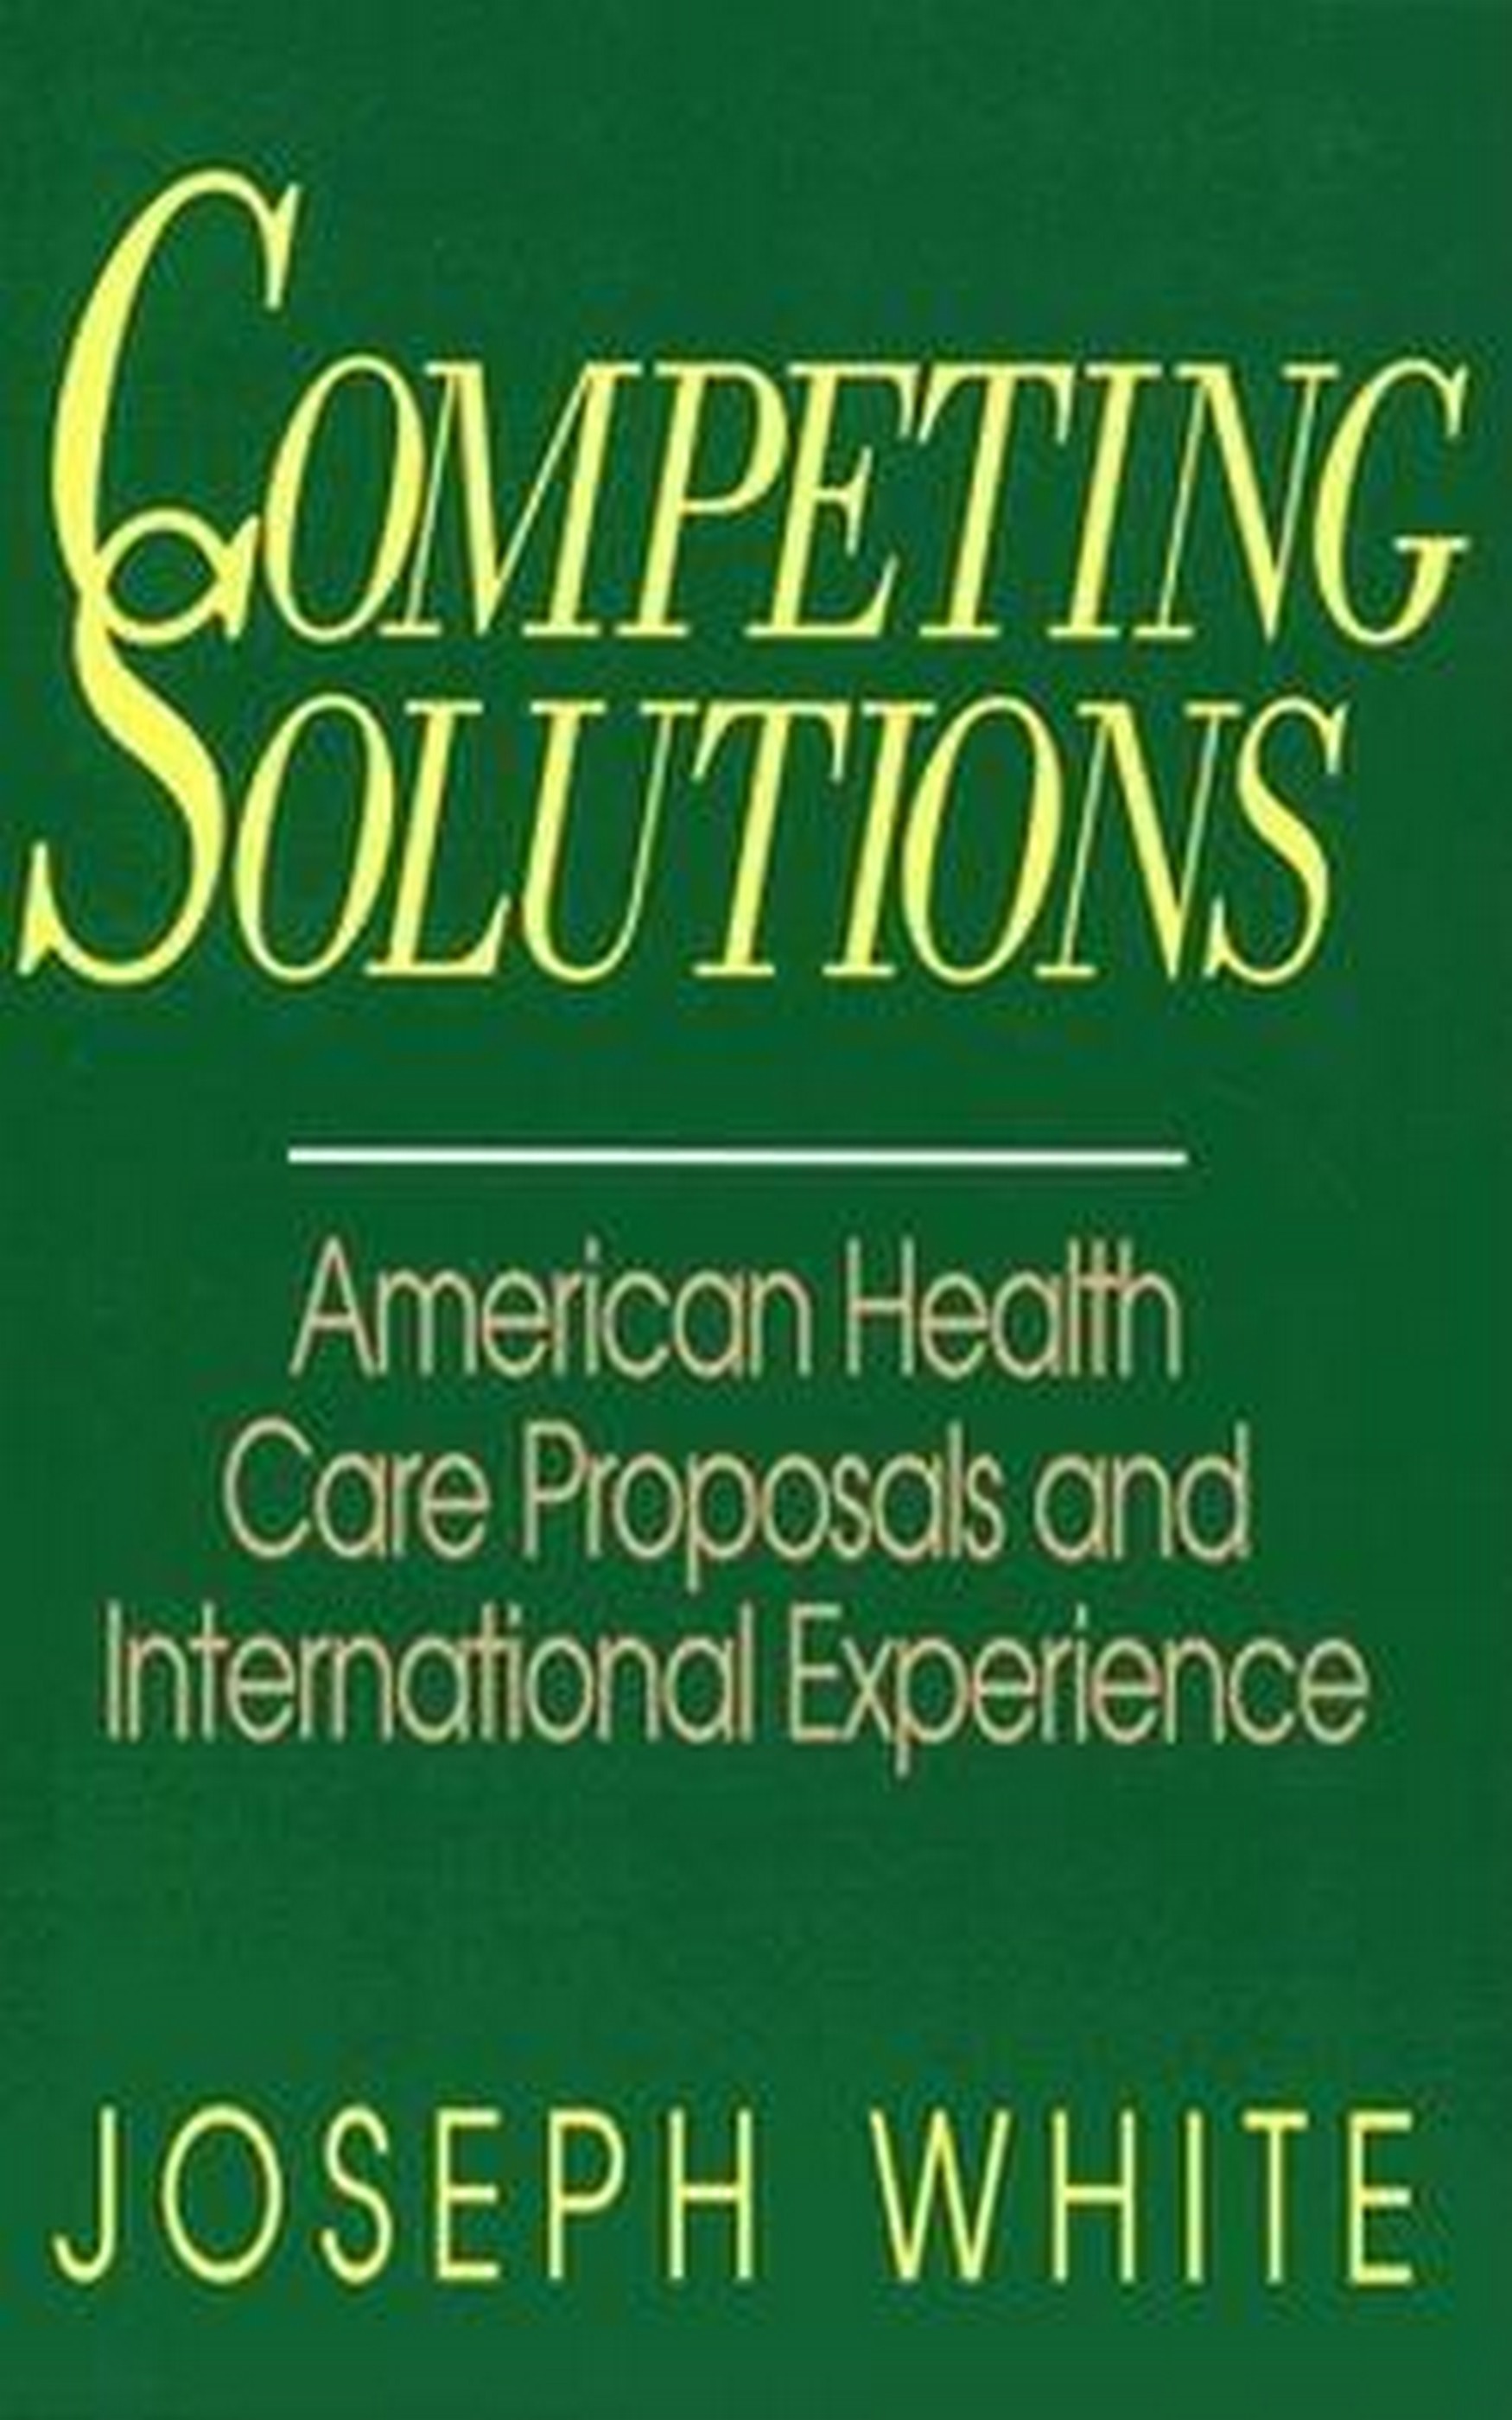 Competing Solutions: American Health Care Proposals and International Experience